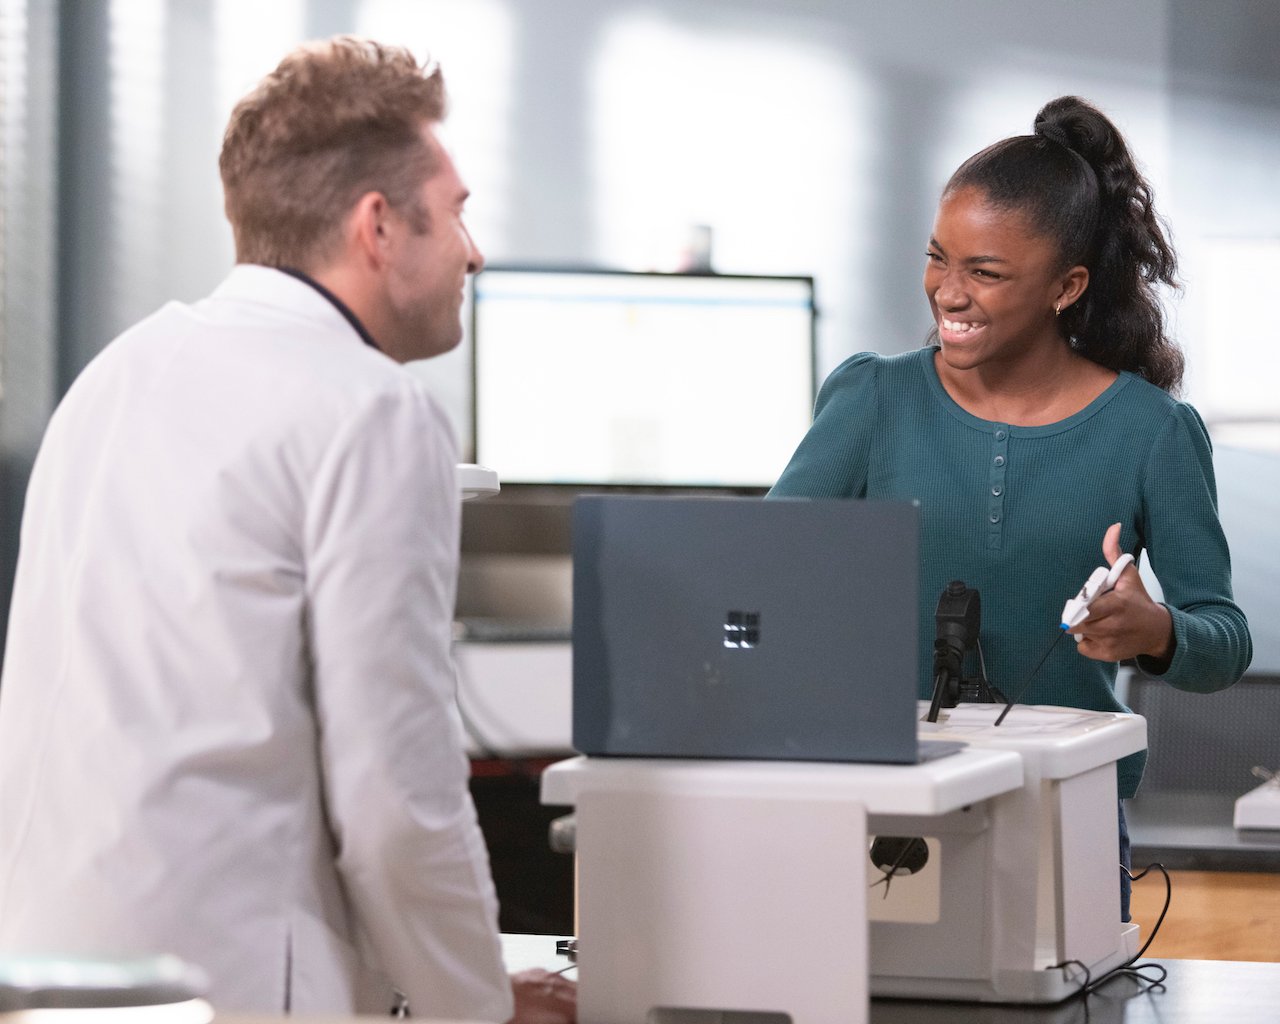 Scott Speedman as Nick Marsh looks at Aniela Gumbs as Zola Gey-Shephard as she's holding tools in front of a computer on 'Grey's Anatomy'.